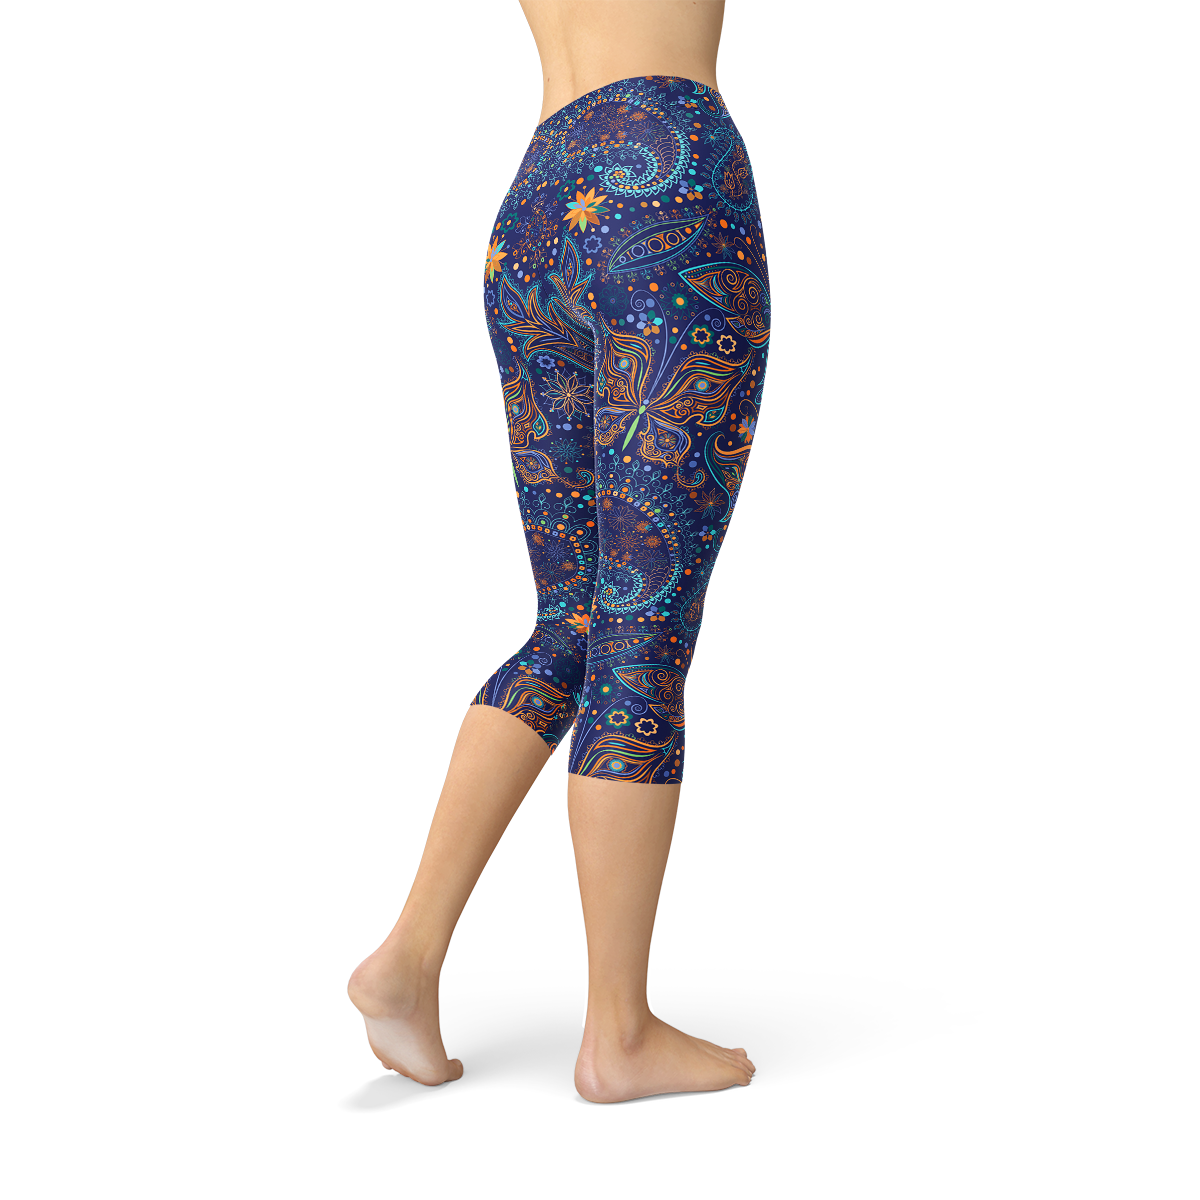 Explore our collection of comfortable capri leggings. Perfect for workouts and daily wear, these leggings offer style and flexibility. Shop now!